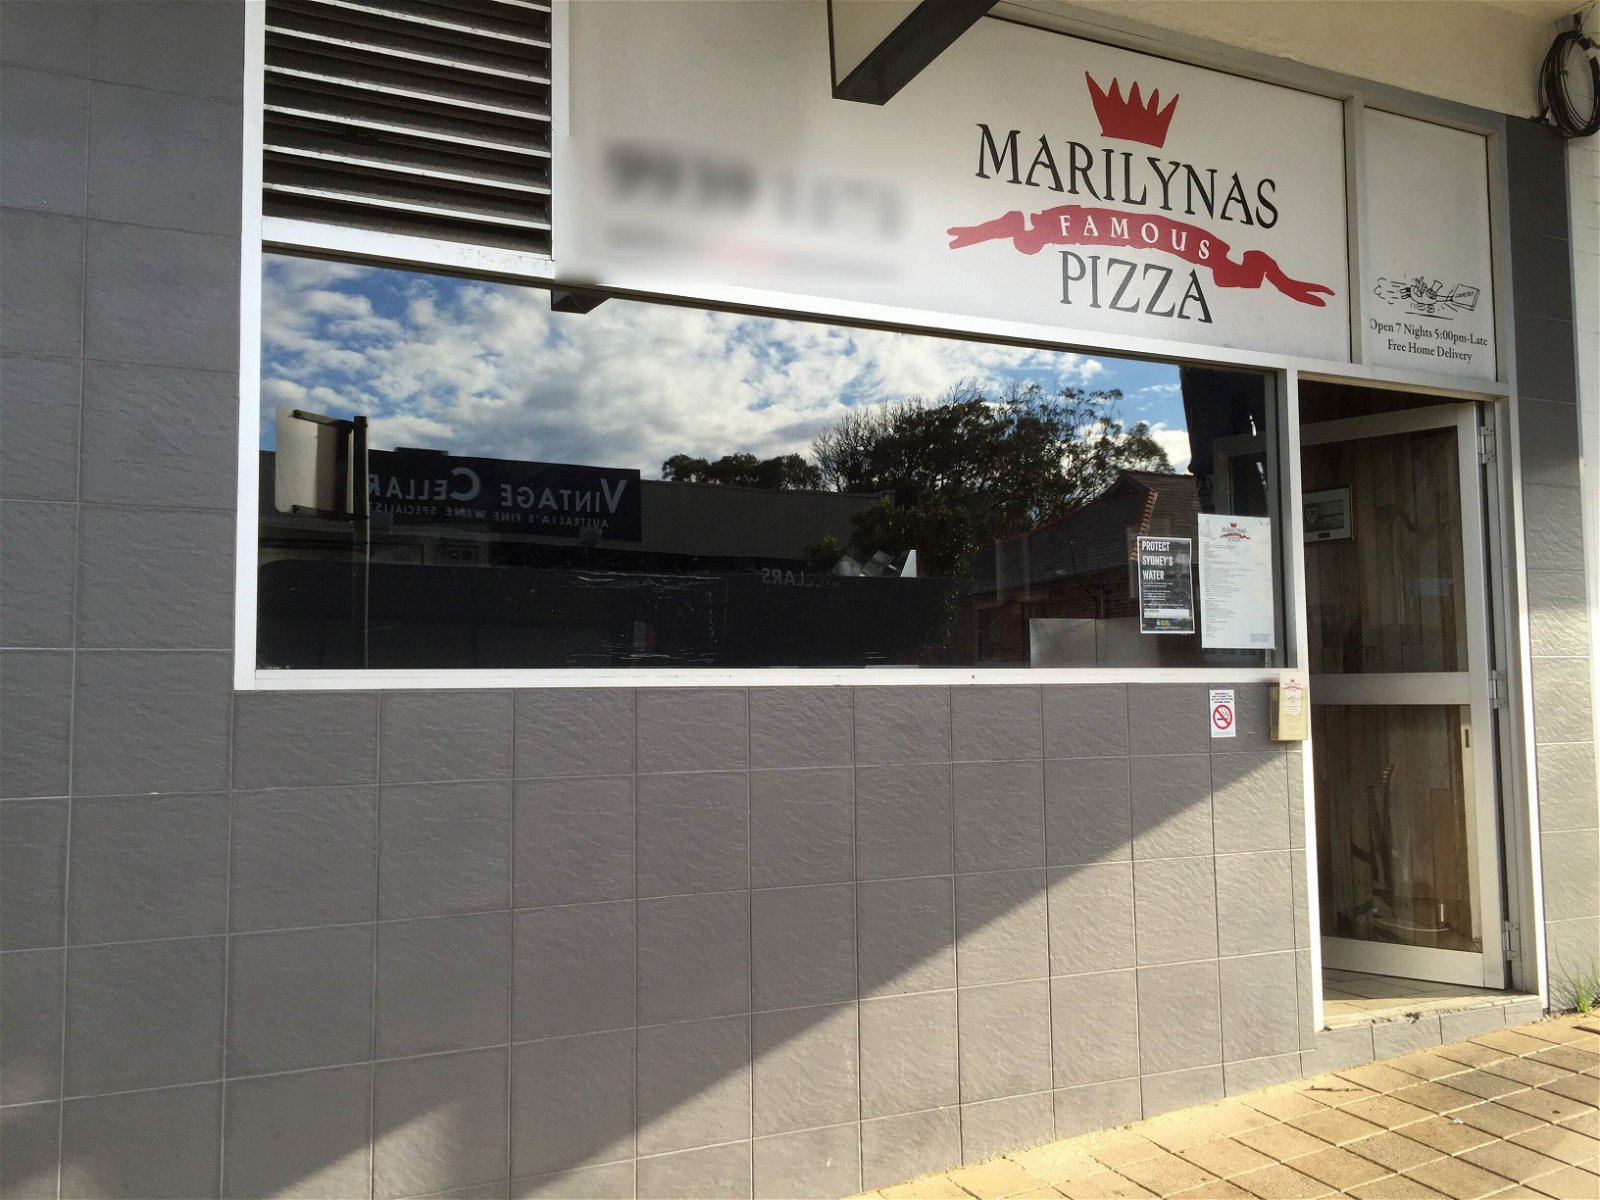 Marilynas Famous Pizza - Freshwater